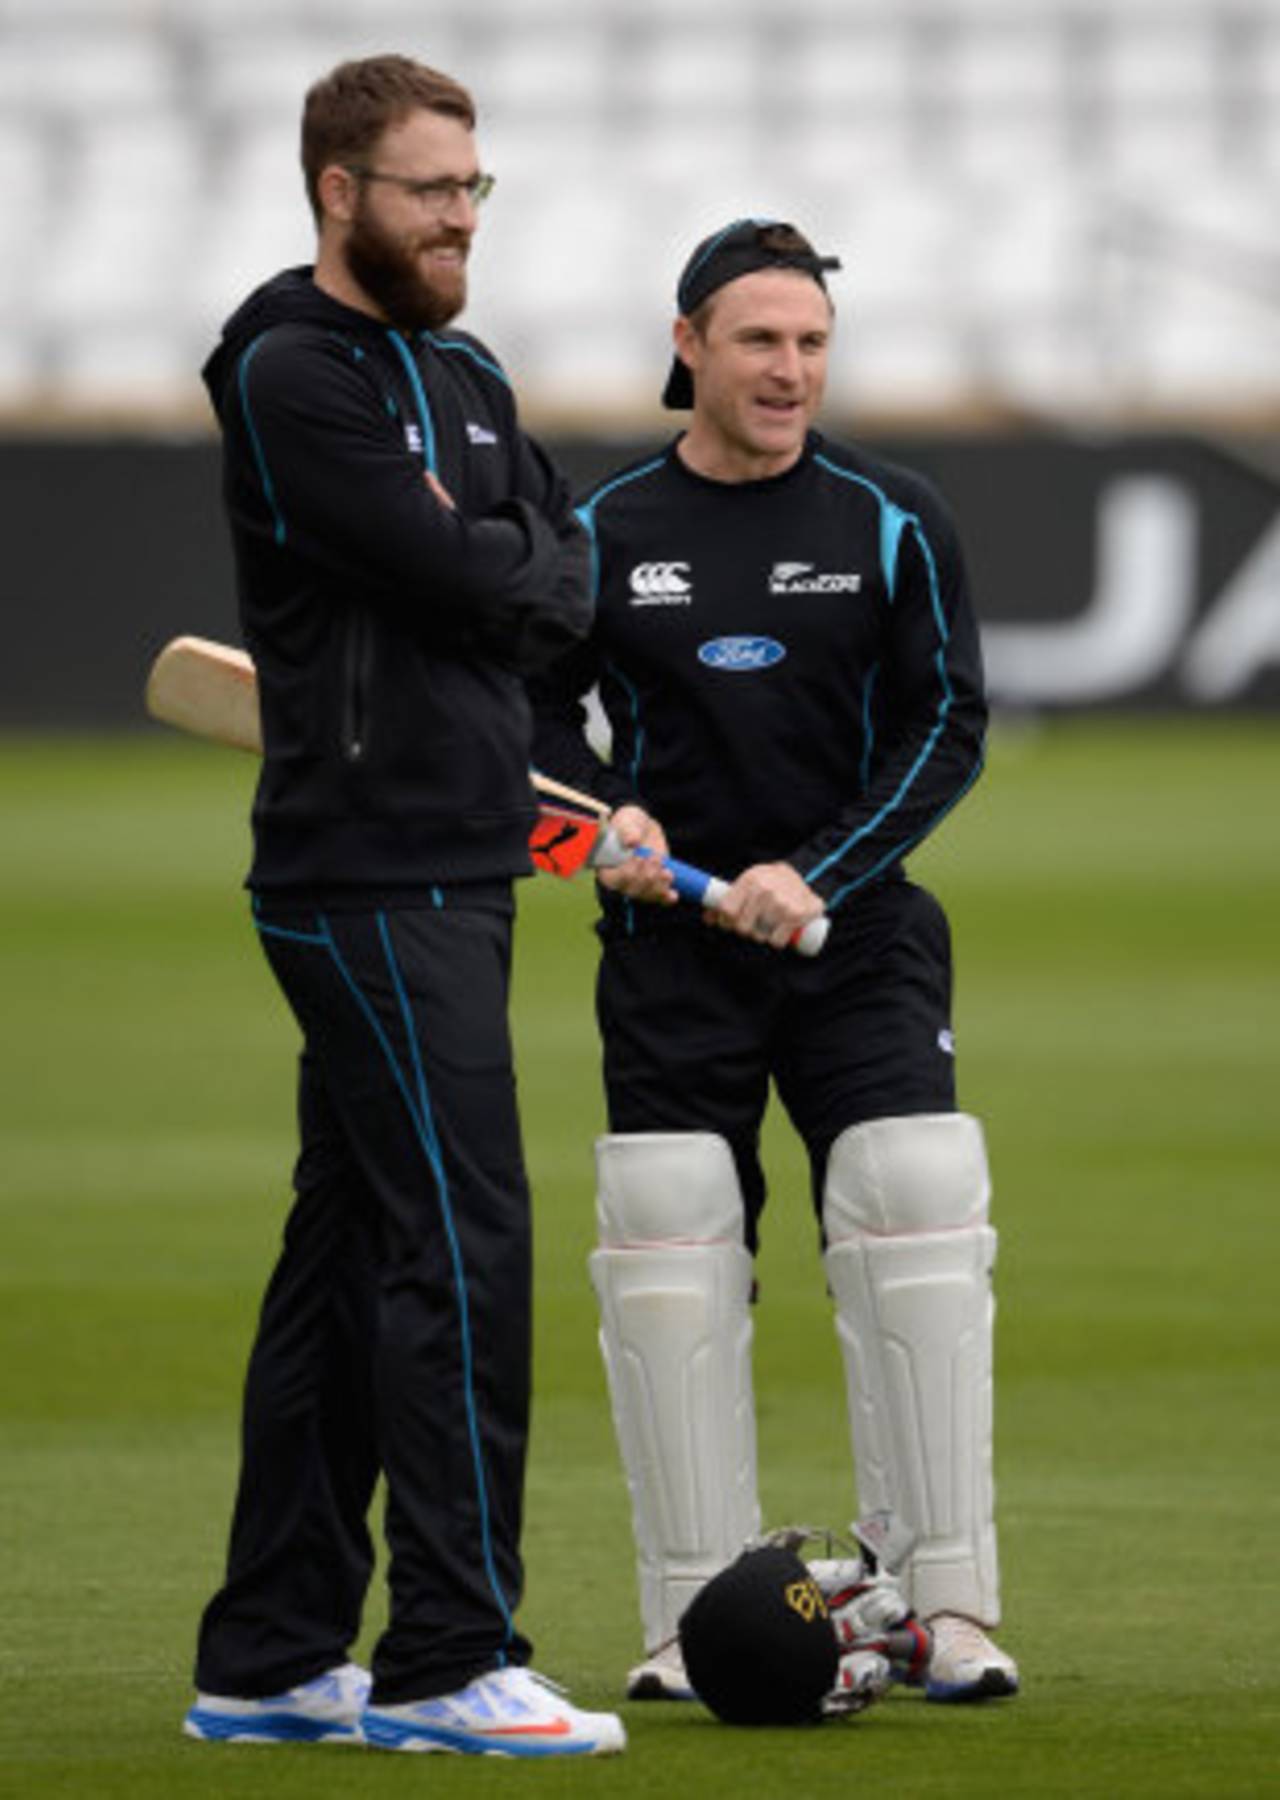 Daniel Vettori and Brendon McCullum during a practice session at Headingley, Leeds, May 22, 2013